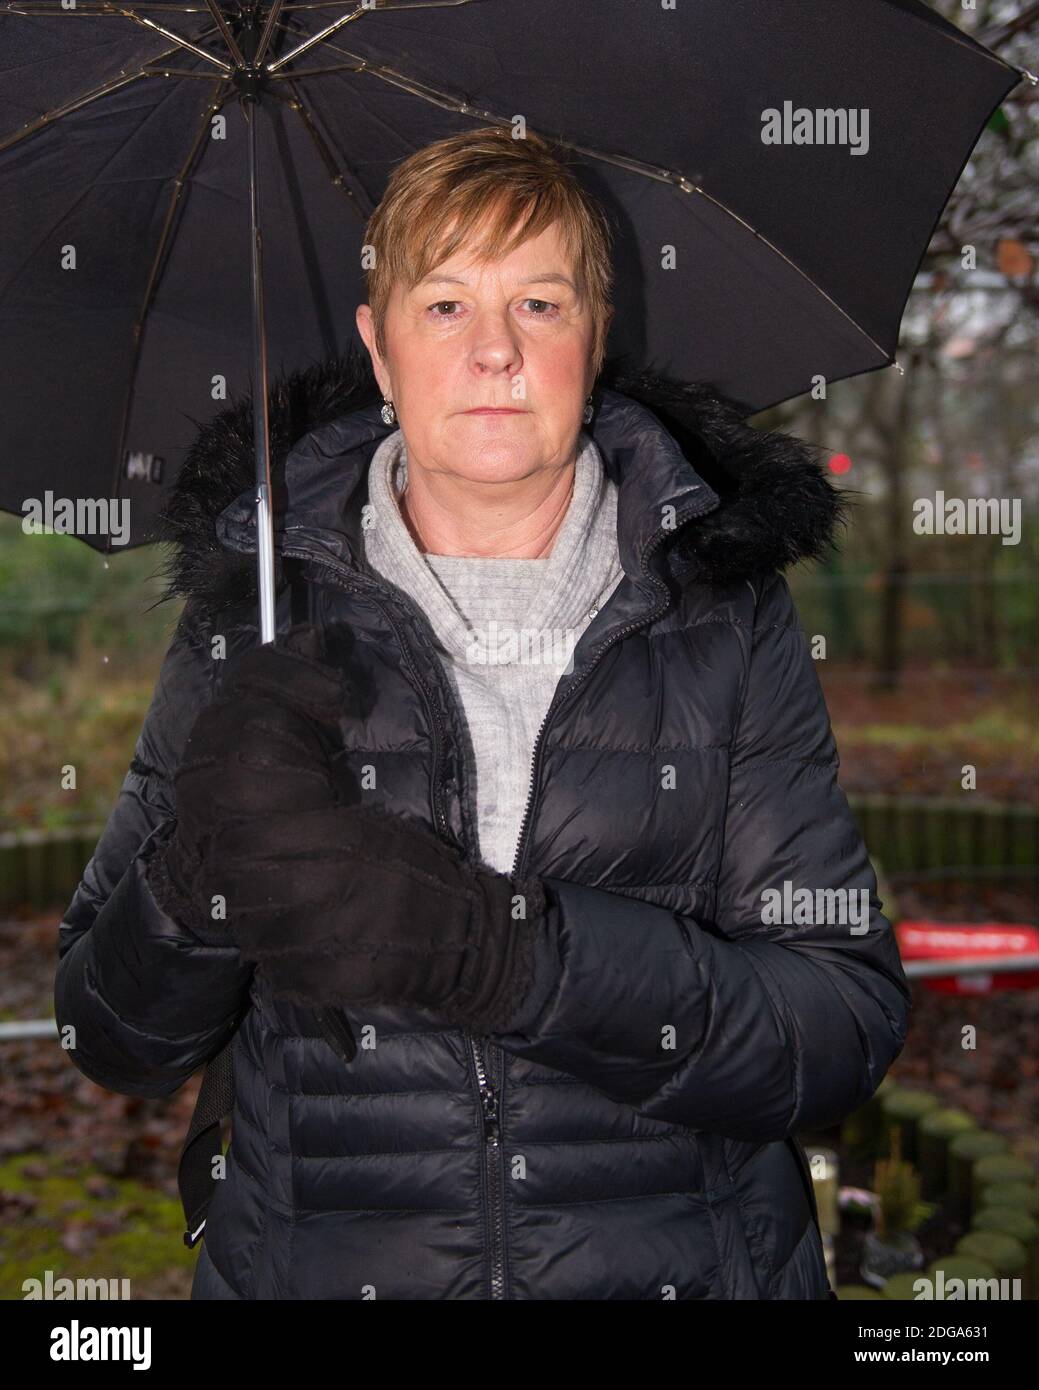 Glasgow, Scotland, UK. 8 December 2020. Pictured: Cllr Maureen Burke - Councillor of Ward 21 of Glasgow North East. SiMBA Charity's Tree Of Tranquility and their ornate bench has been severely vandalised and set fire by vandals leaving their cigarette lighter behind. Distraught and bereaved Parents, Kat and Fraser made the horrific discovery as they visited SiMBA's memorial garden. Credit Colin Fisher/Alamy Live News. Stock Photo